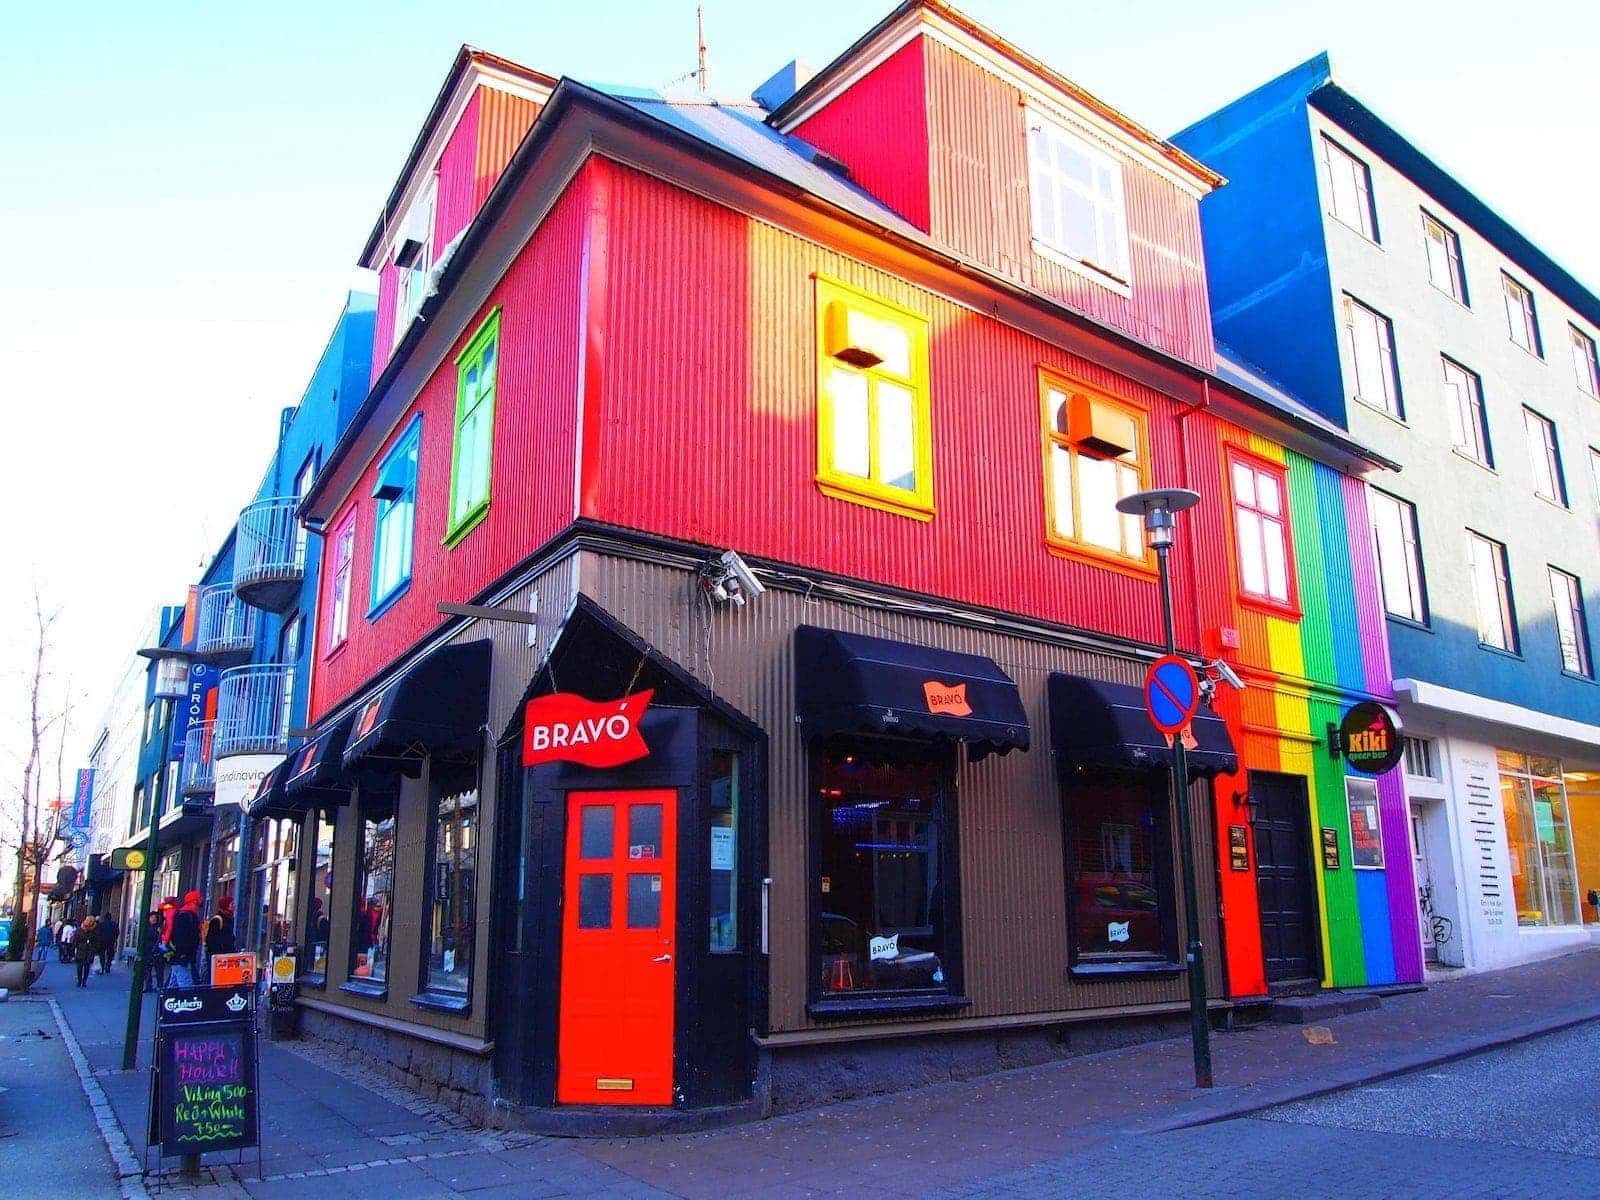 The gay spots in Reykjavik are all located in the same neighborhood